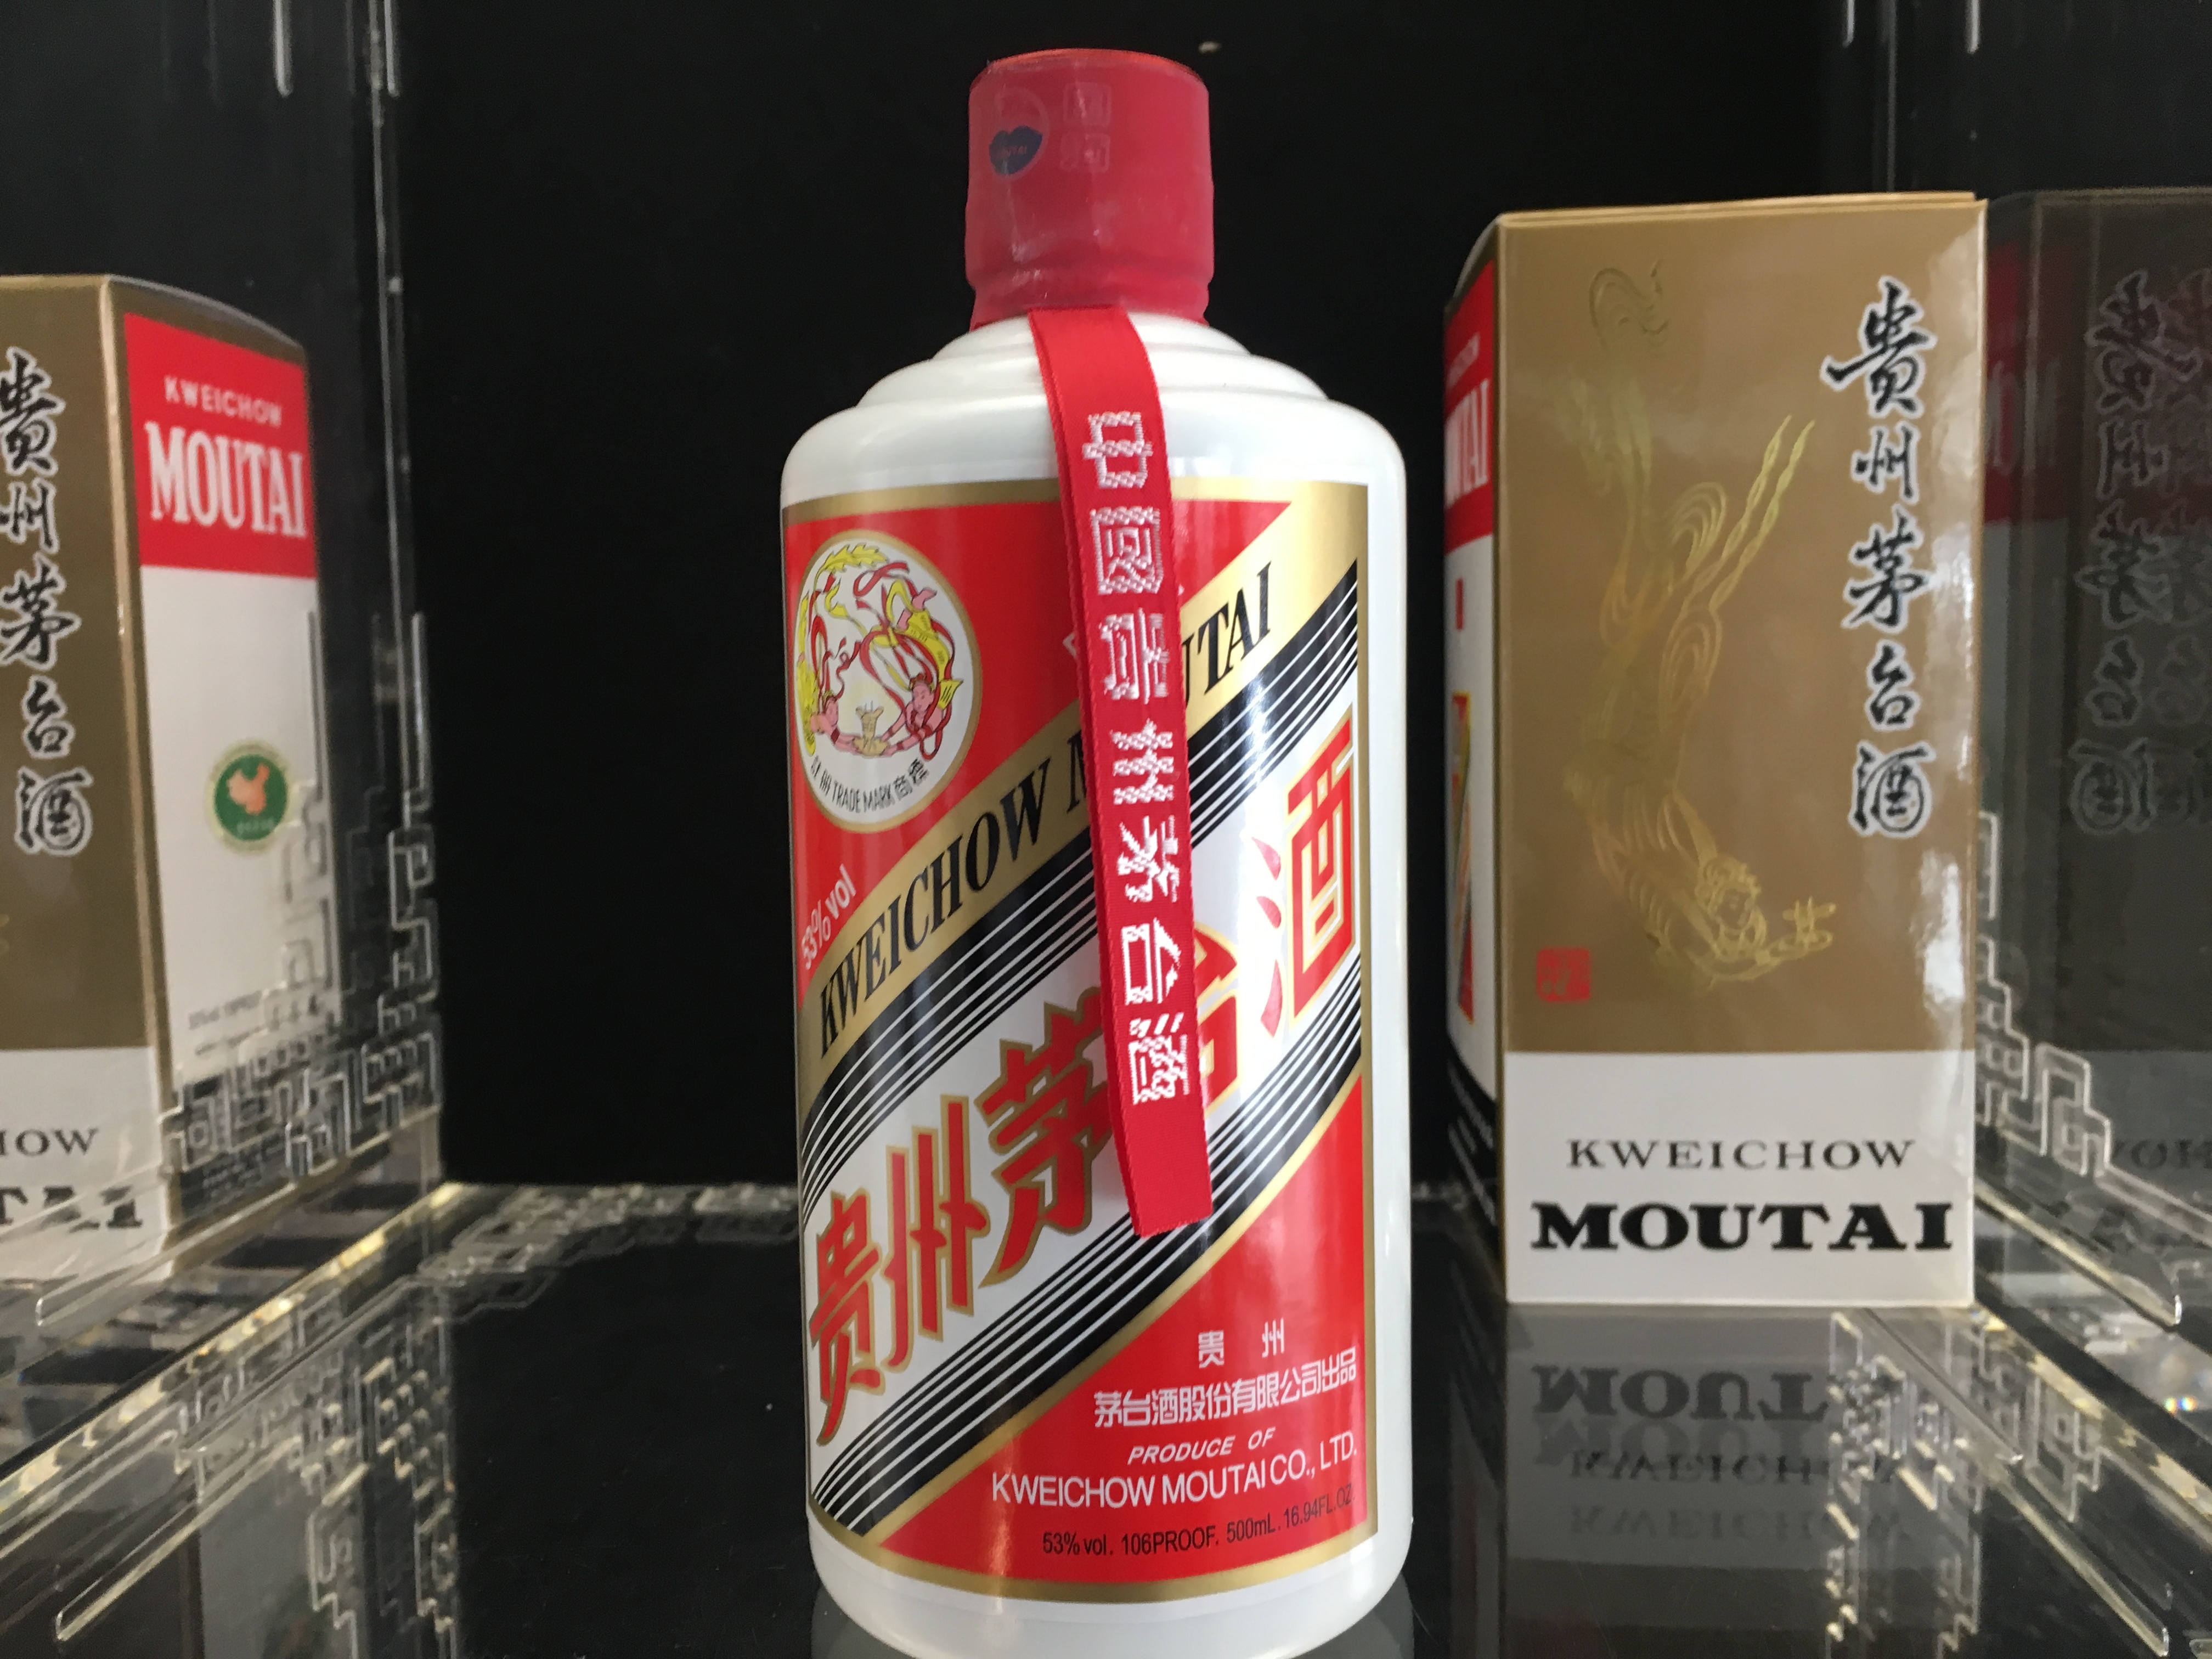 Bottles of Moutai start at $70 and can go up to thousands of dollars. 